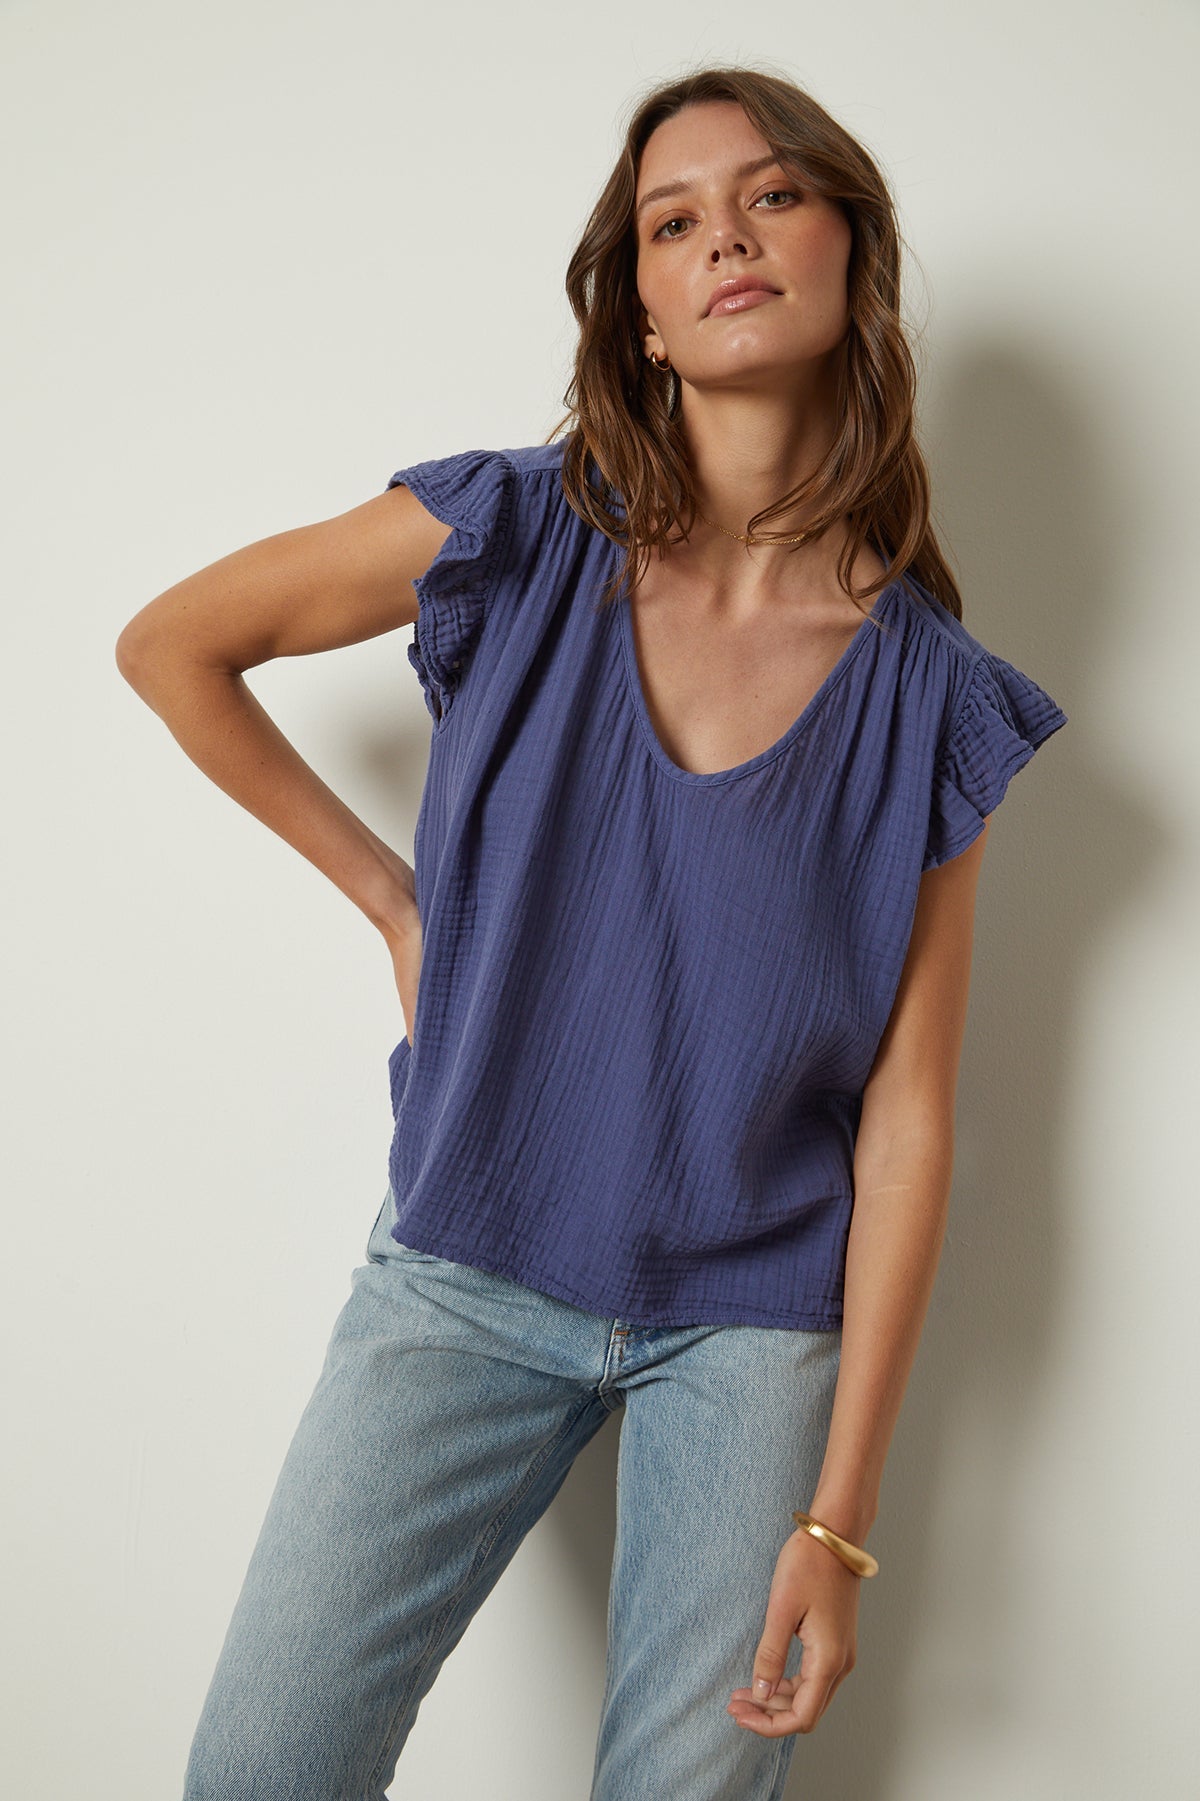 the model is wearing REMI RUFFLE SLEEVE TOP jeans and a blue top by Velvet by Graham & Spencer.-26631973929153